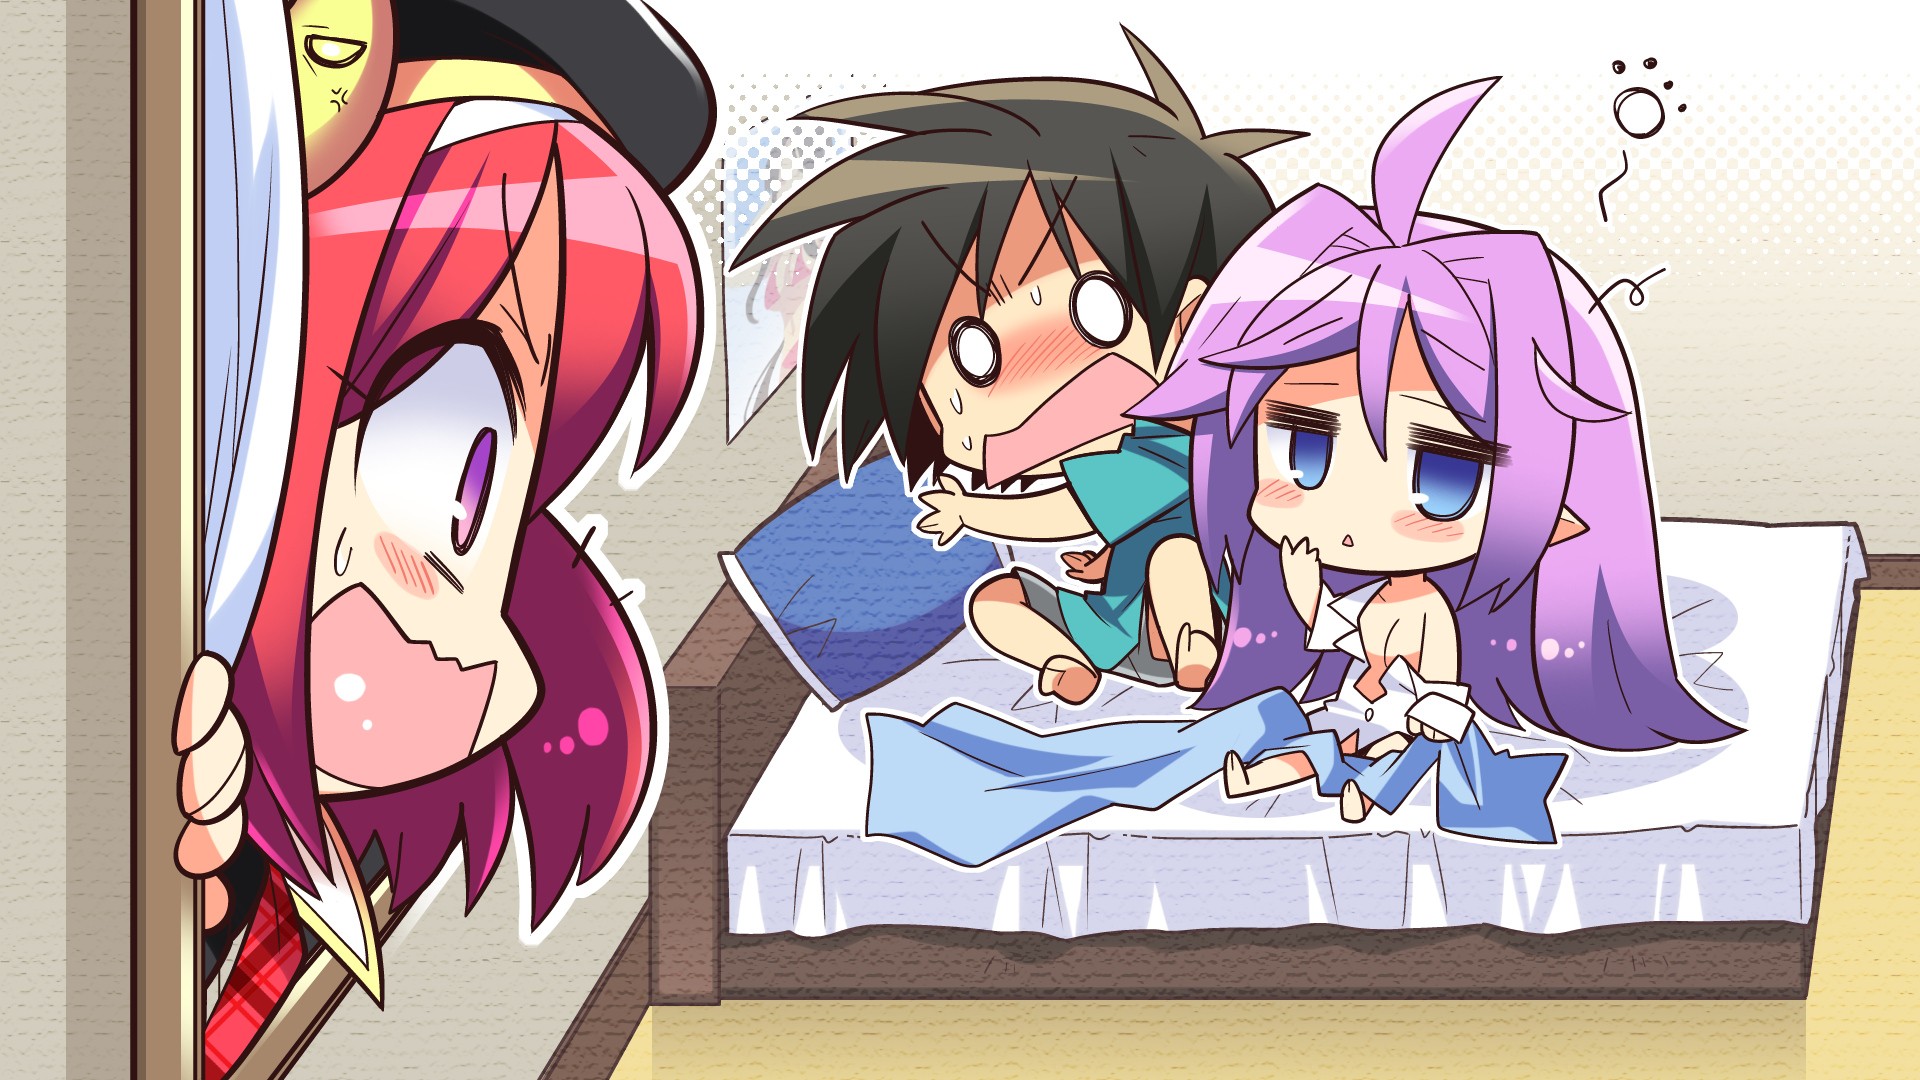 Anime 1920x1080 anime girls Maikaze no Melt -Where Leads to Feeling Destination- chibi anime boys purple hair anime bed embarrassed angry two women